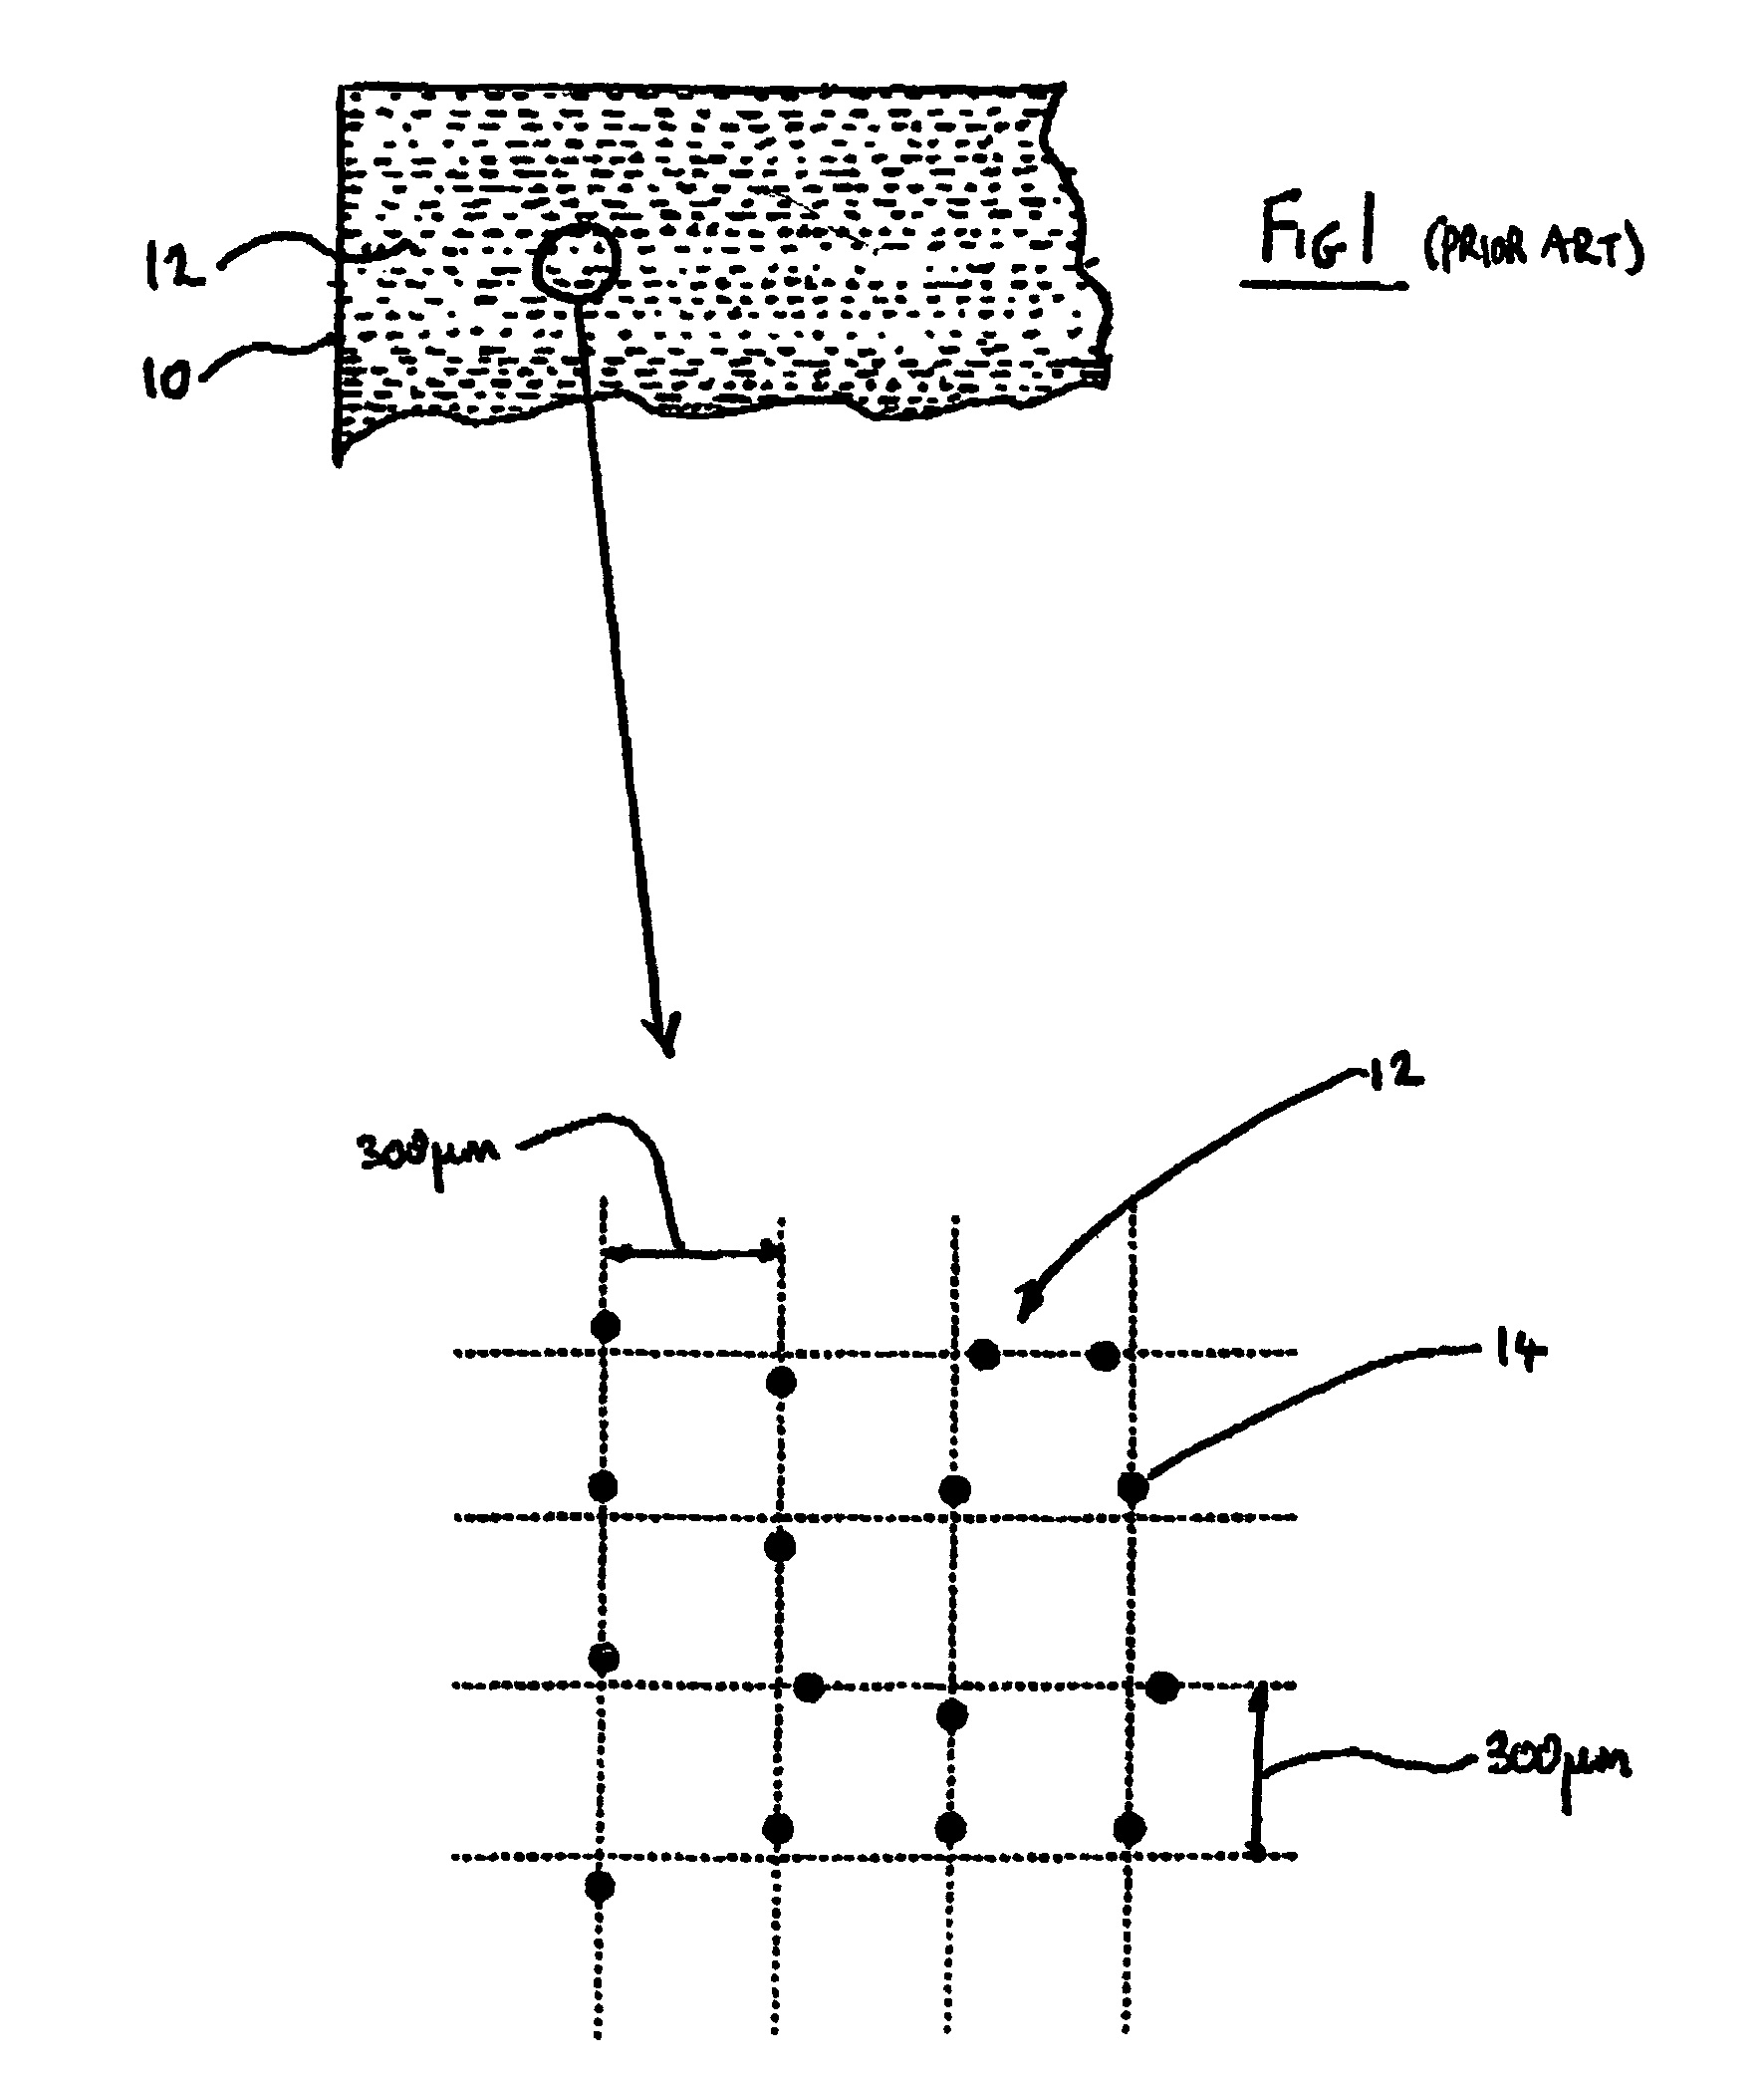 Digital documents, apparatus, methods and software relating to associating an identity of paper printed with digital pattern with equivalent digital documents